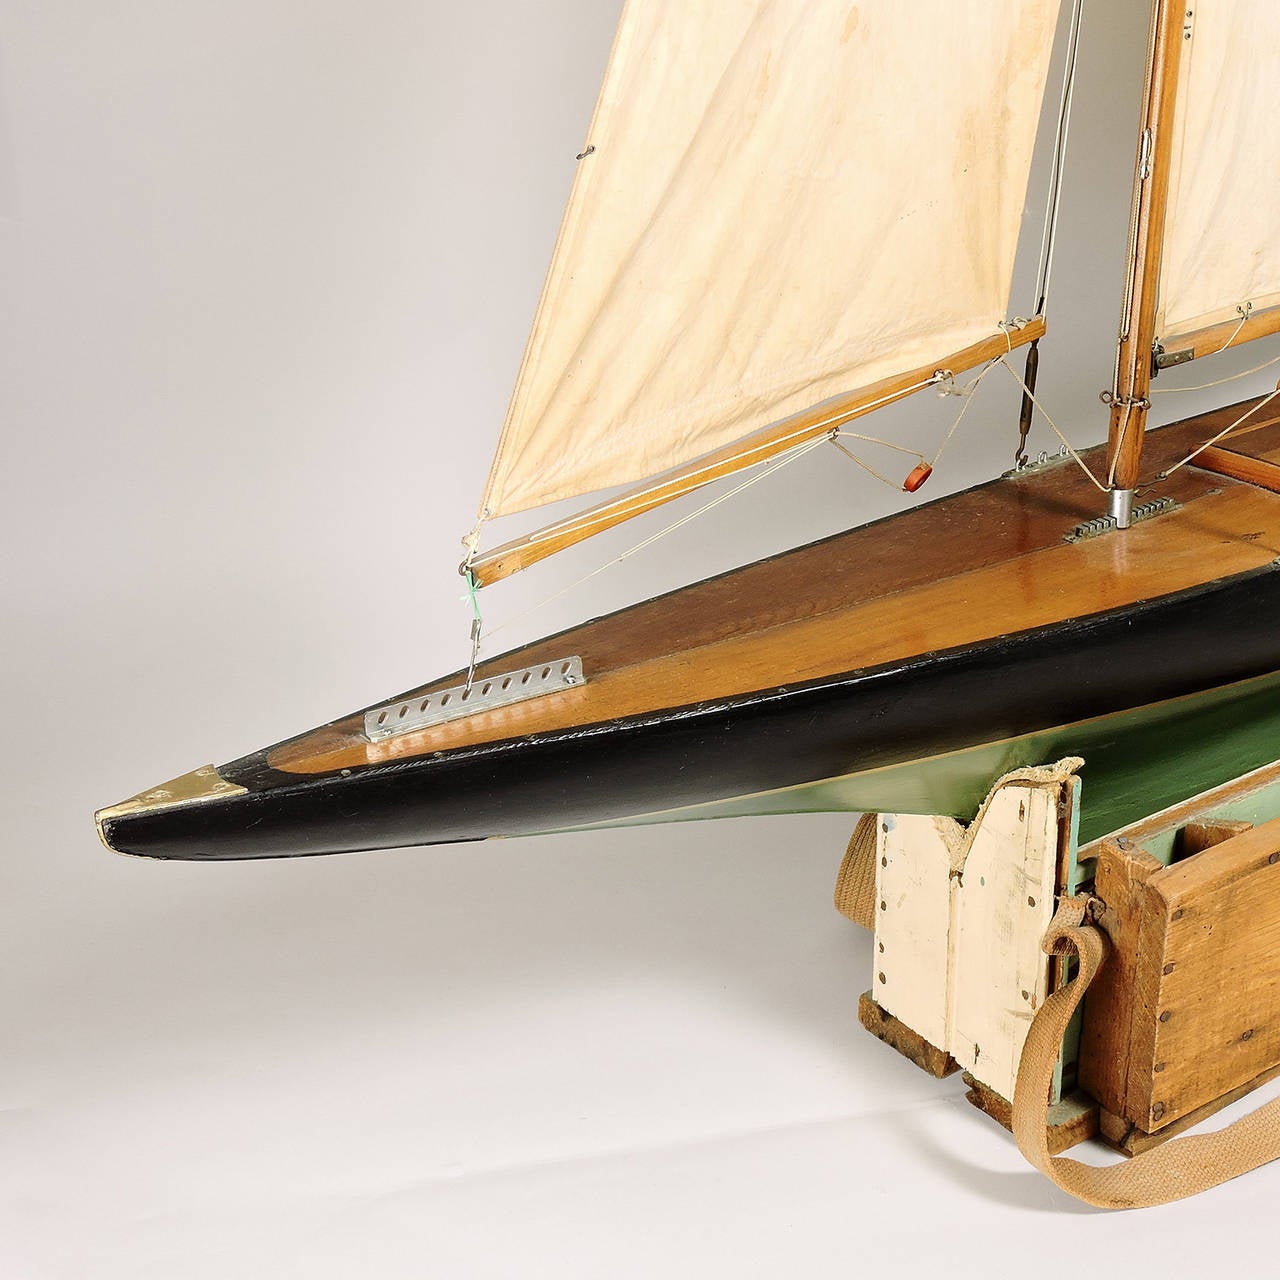 Superb vintage 20th century functional pond model of a sailboat on a custom carrying base marked 